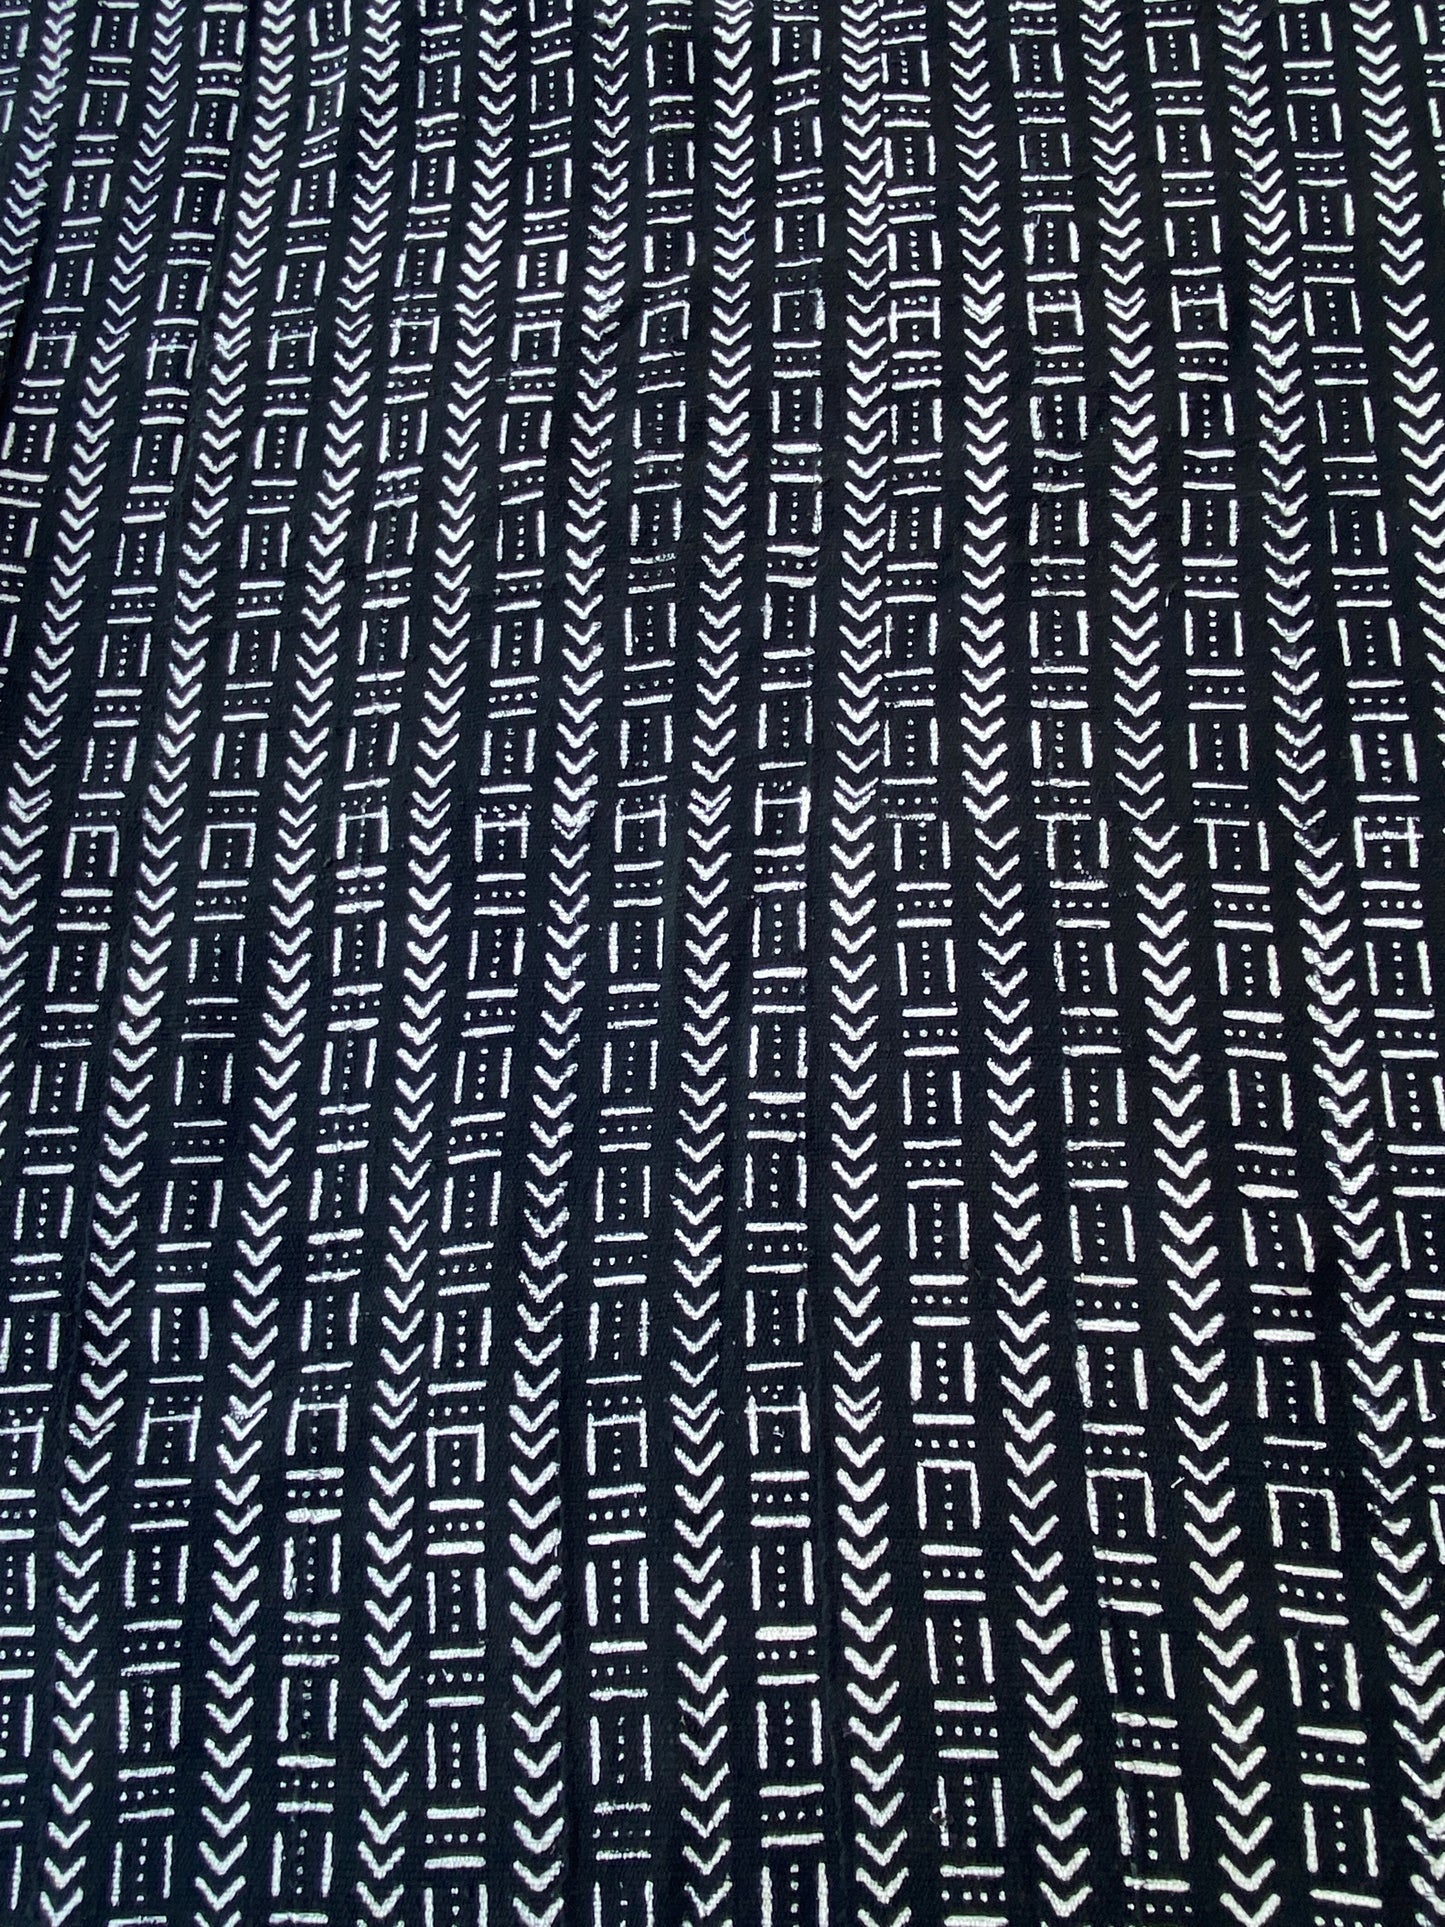 # 3851 African Black and White Mud Cloth Textile Mali